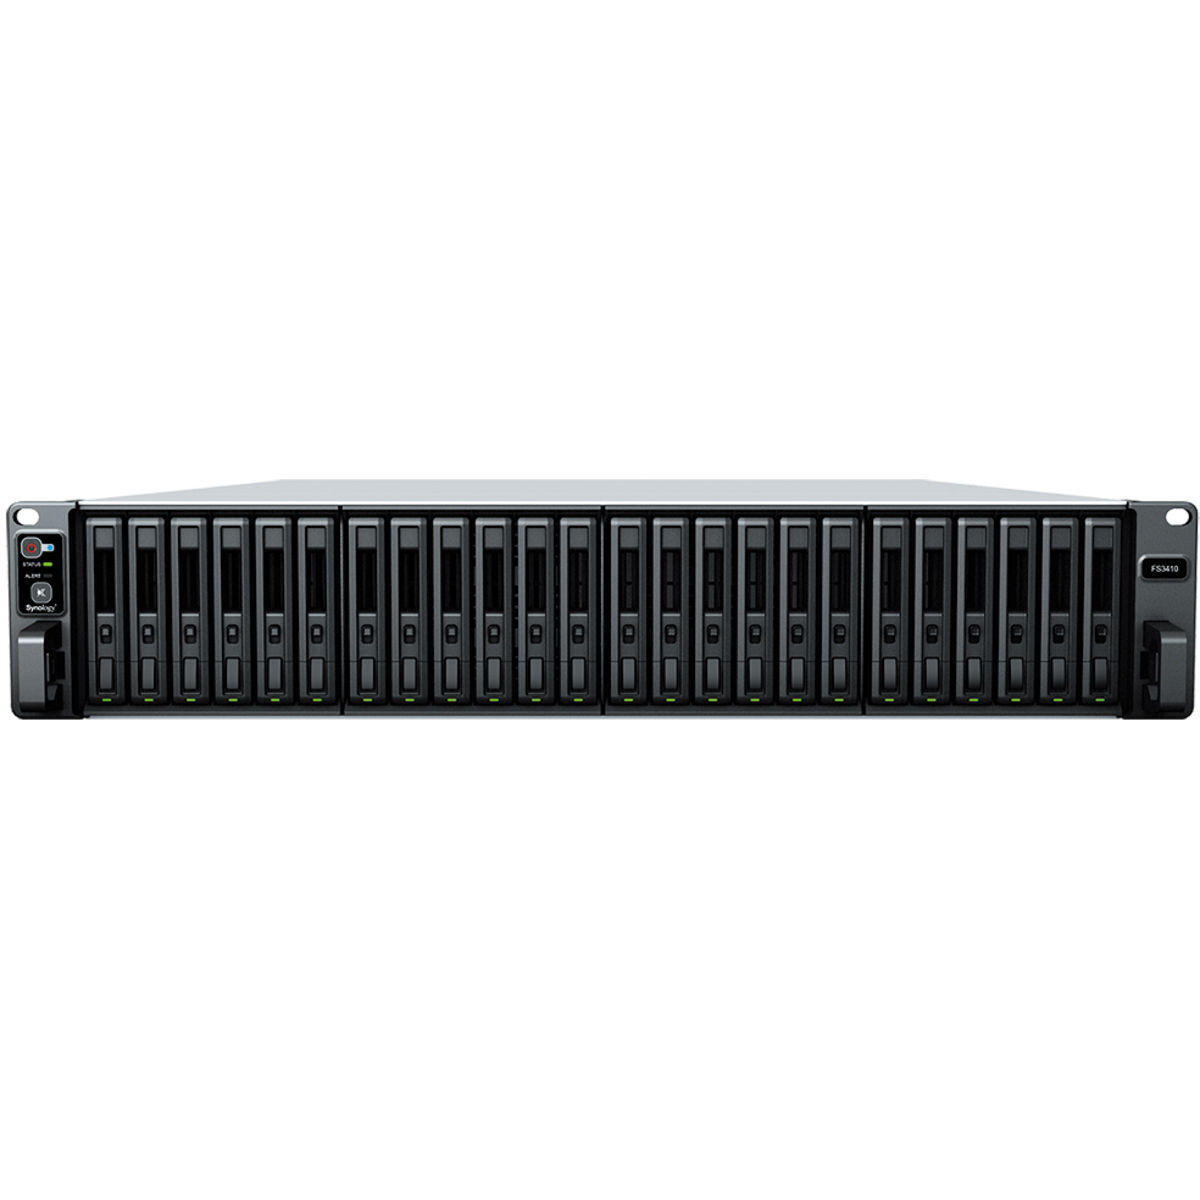 Synology FlashStation FS3410 17tb 24-Bay RackMount Large Business / Enterprise NAS - Network Attached Storage Device 17x1tb Western Digital Red SA500 WDS100T1R0A 2.5 560/530MB/s SATA 6Gb/s SSD NAS Class Drives Installed - Burn-In Tested FlashStation FS3410